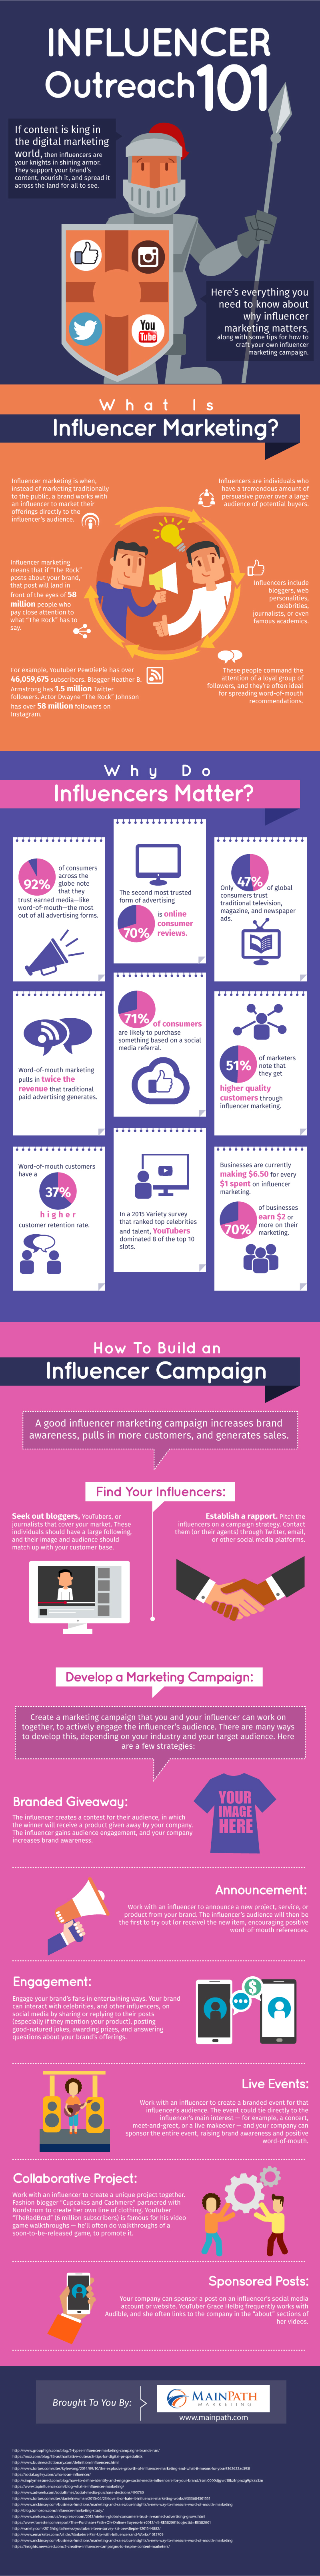 guide to influencer marketing infographic